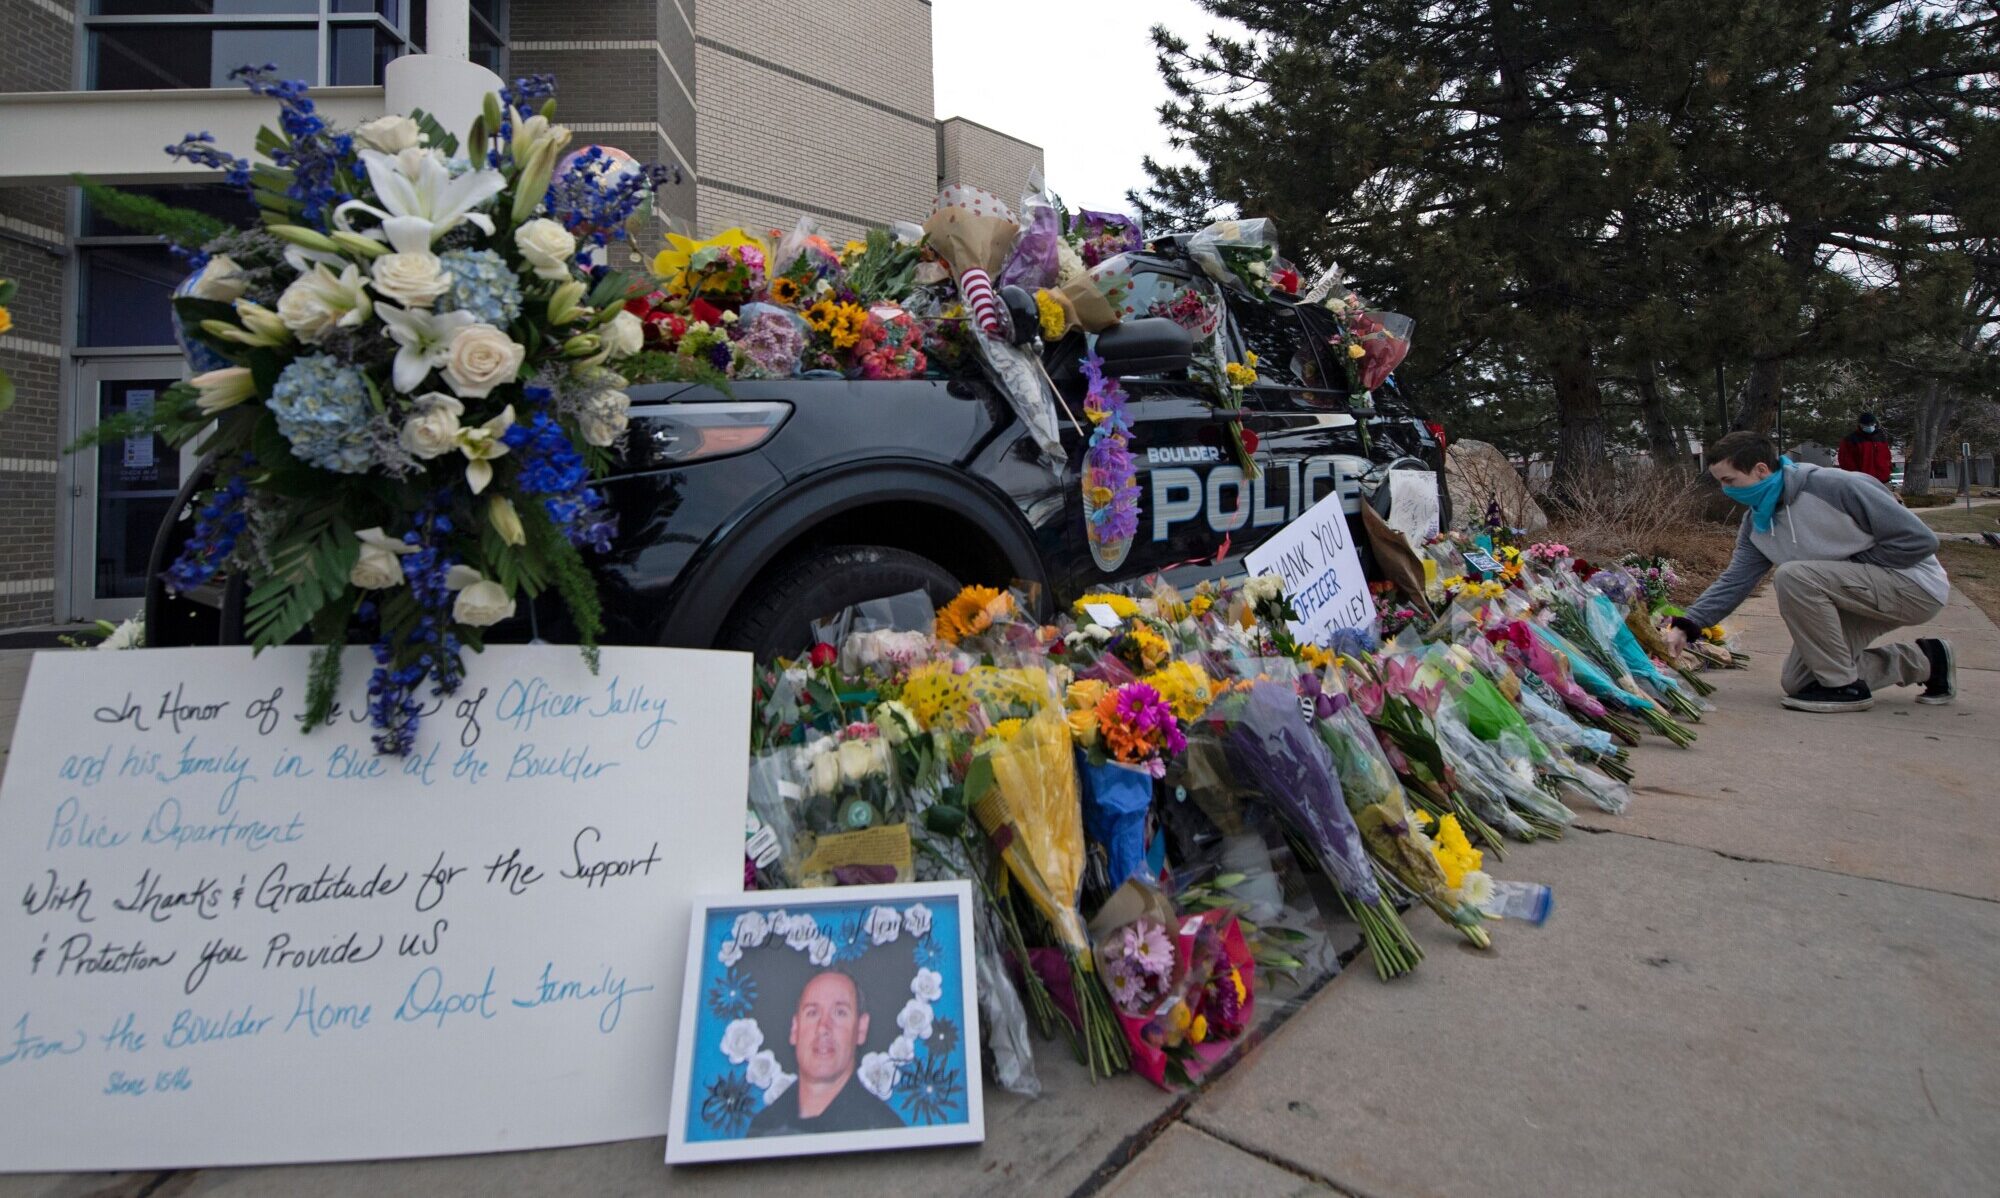 Police Officer Who Lost His Life in Boulder Mass Shooting Celebrated as Hero